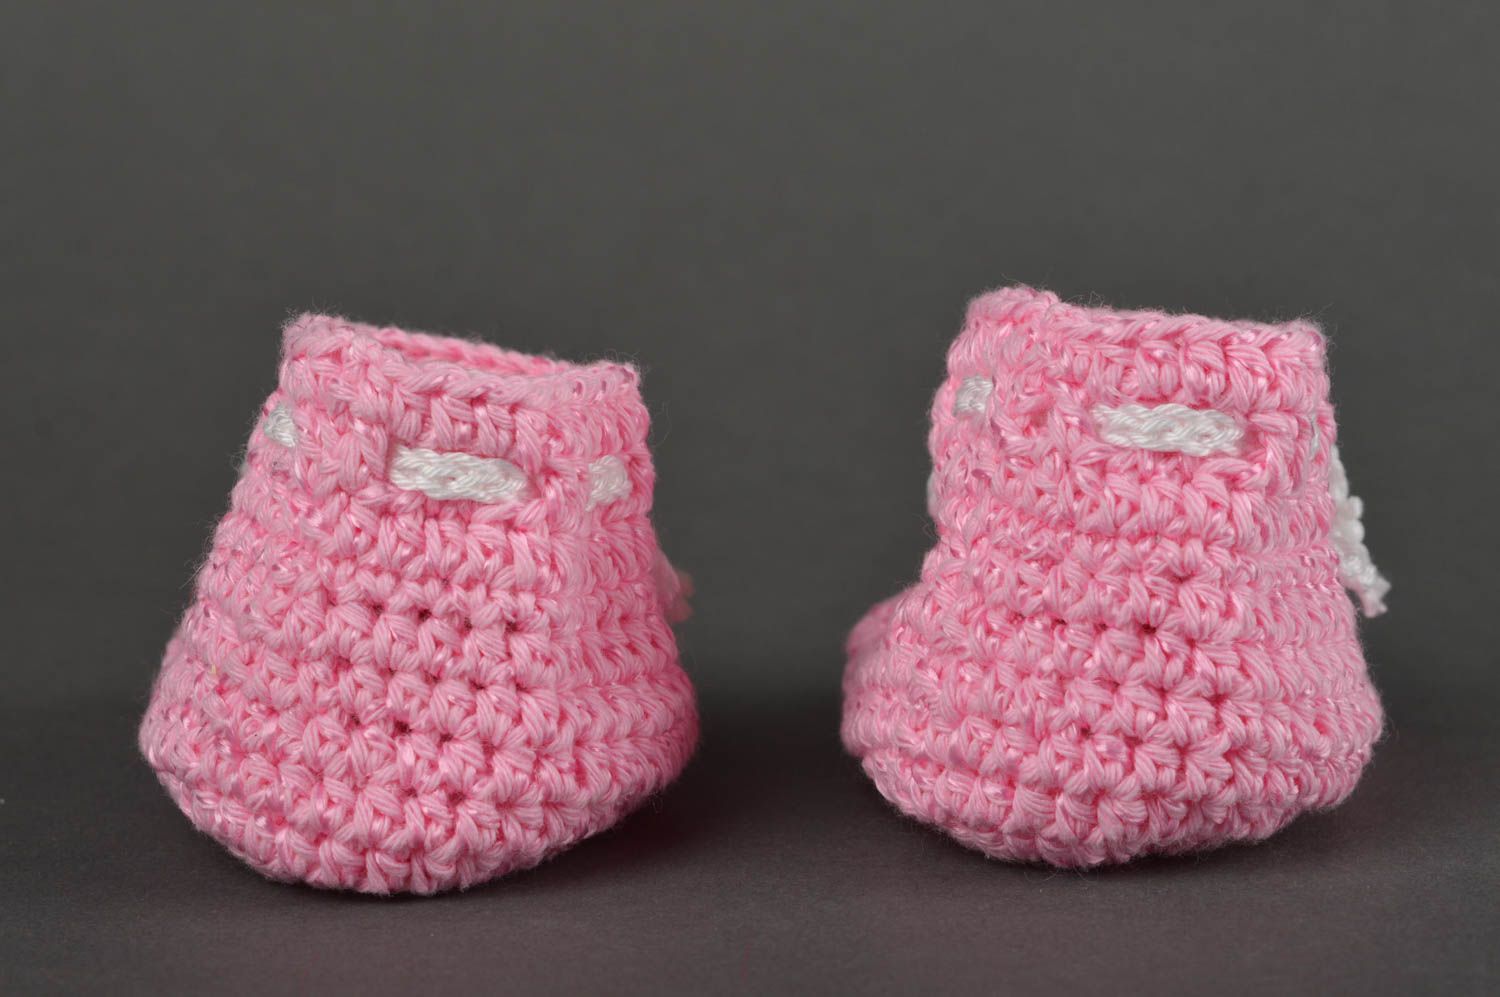 Handmade crocheted baby bootees unusual shoes for newborns stylish shoes photo 4